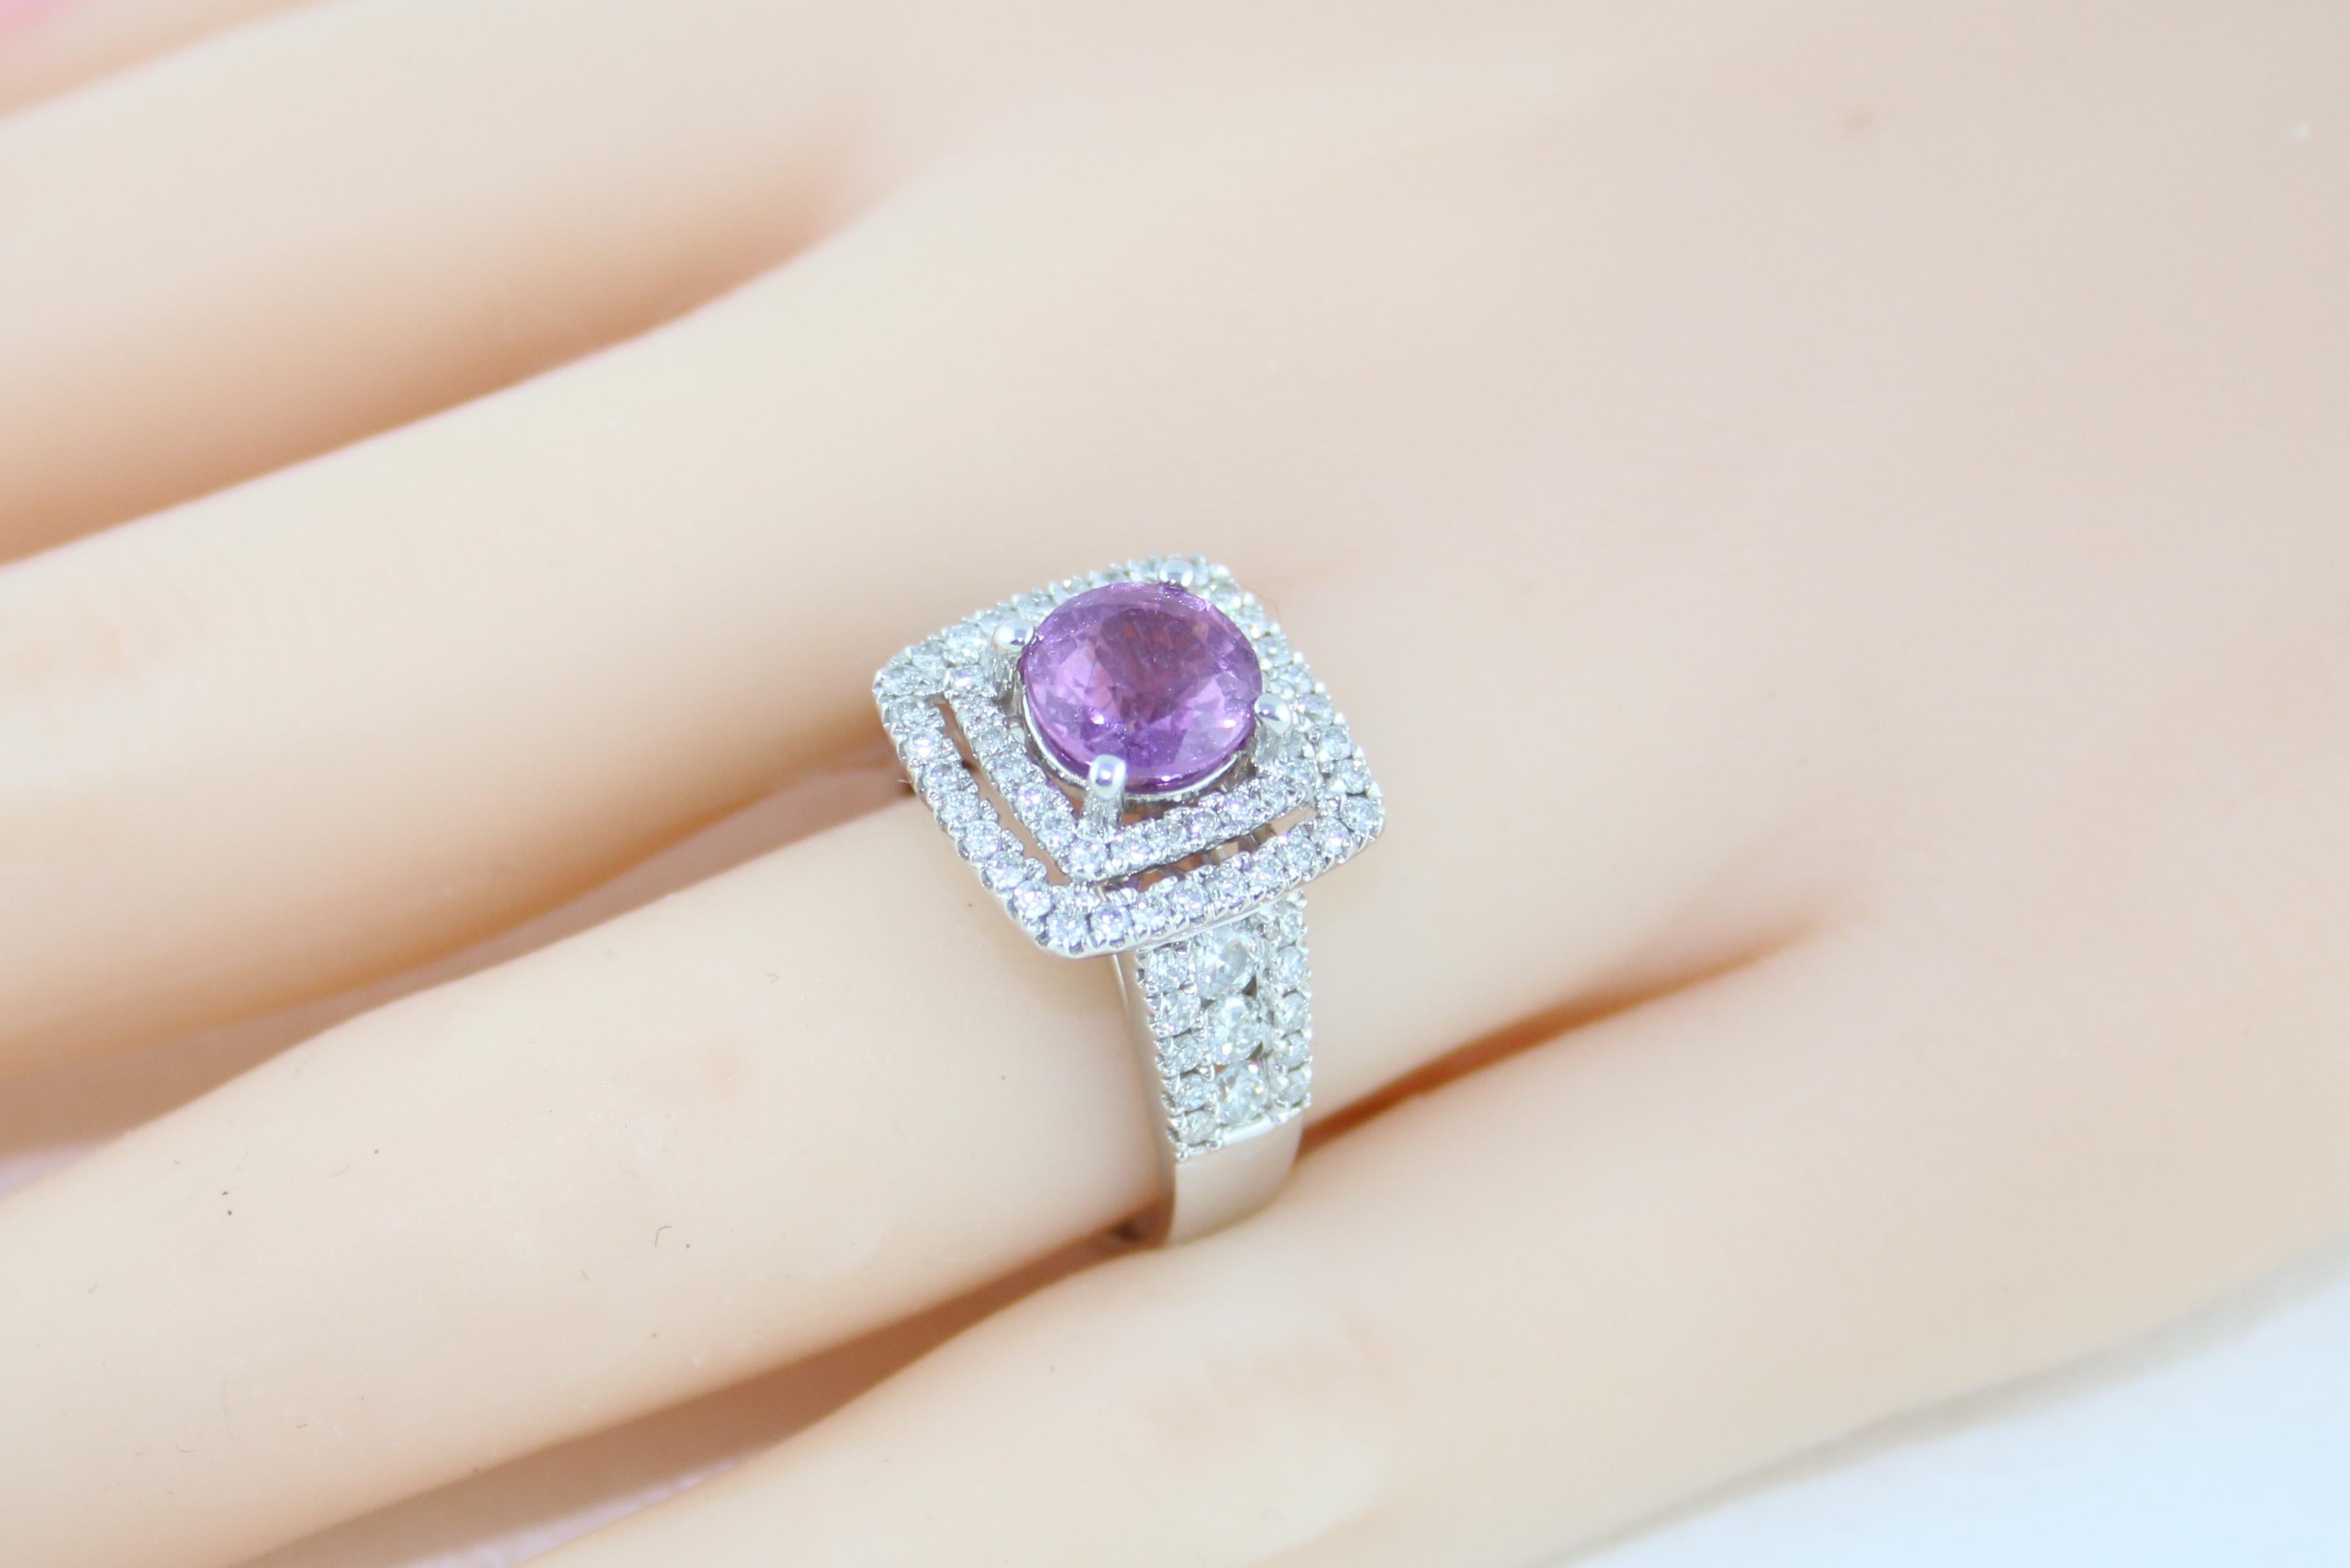 Certified No Heat 1.97 Carat Pinkish Violet Sapphire Diamond Gold Ring For Sale 3